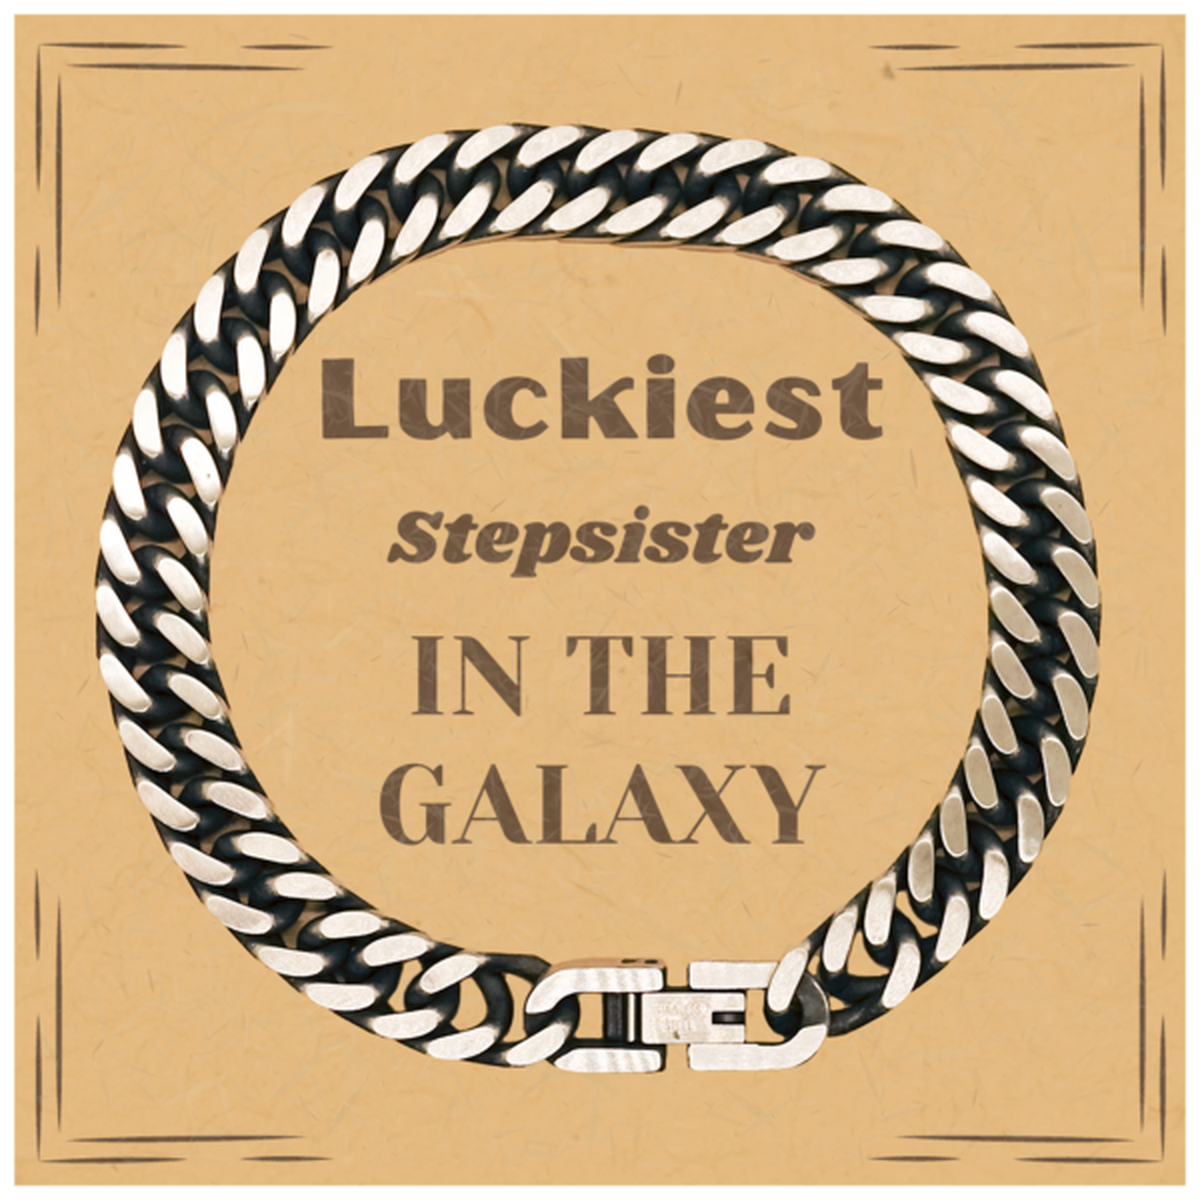 Luckiest Stepsister in the Galaxy, To My Stepsister Message Card Gifts, Christmas Stepsister Cuban Link Chain Bracelet Gifts, X-mas Birthday Unique Gifts For Stepsister Men Women